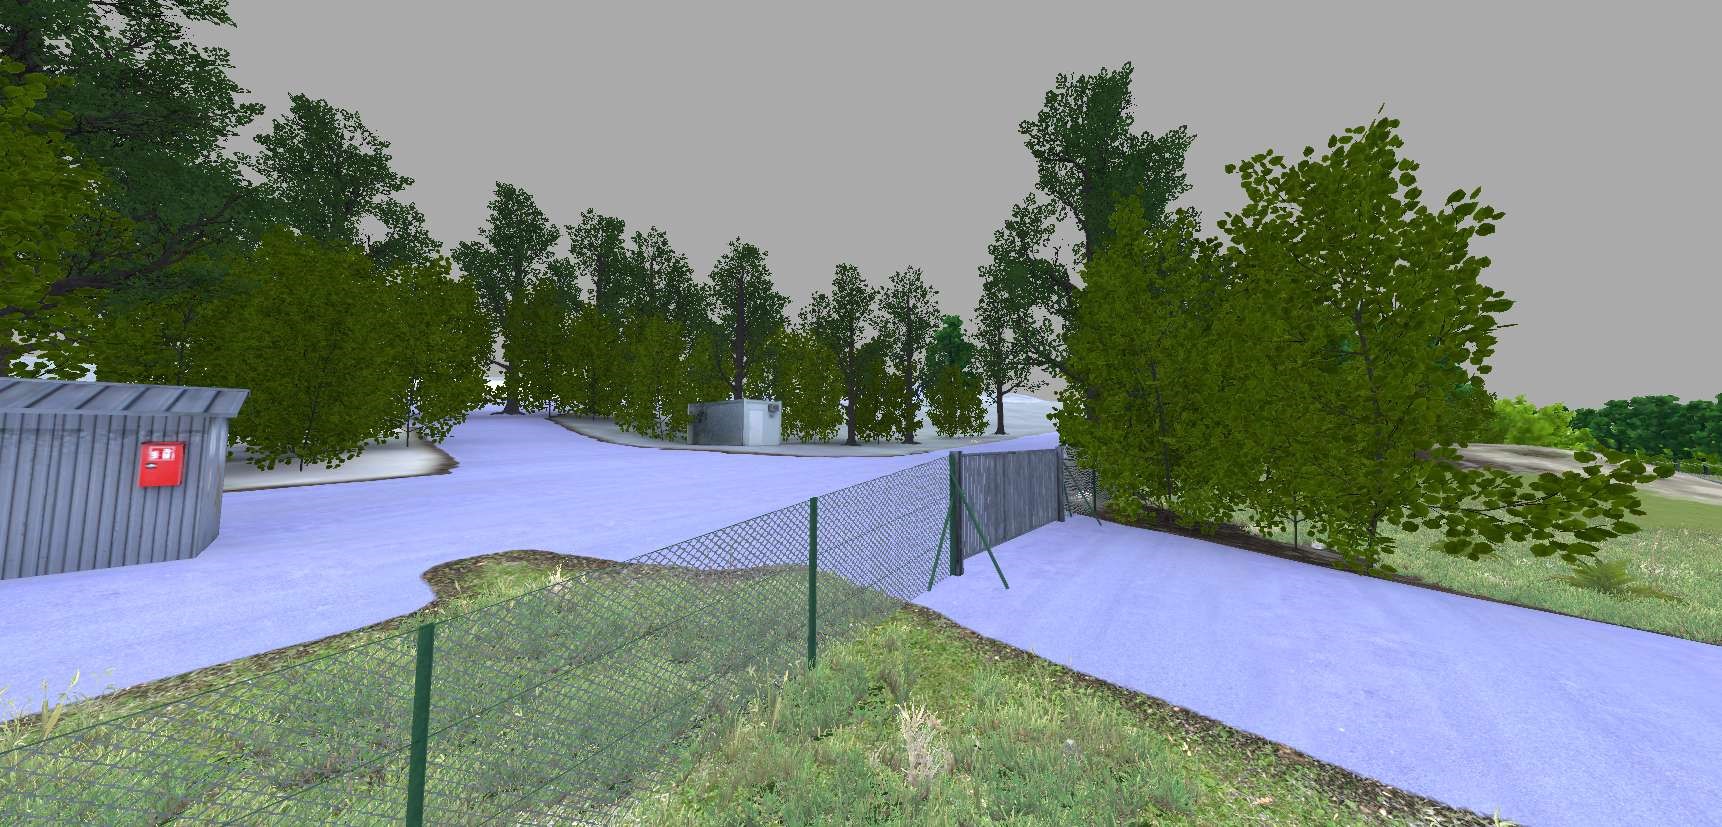 A virtual reality training scene showing a fenced-off area - the entrance to an ammunition depot.